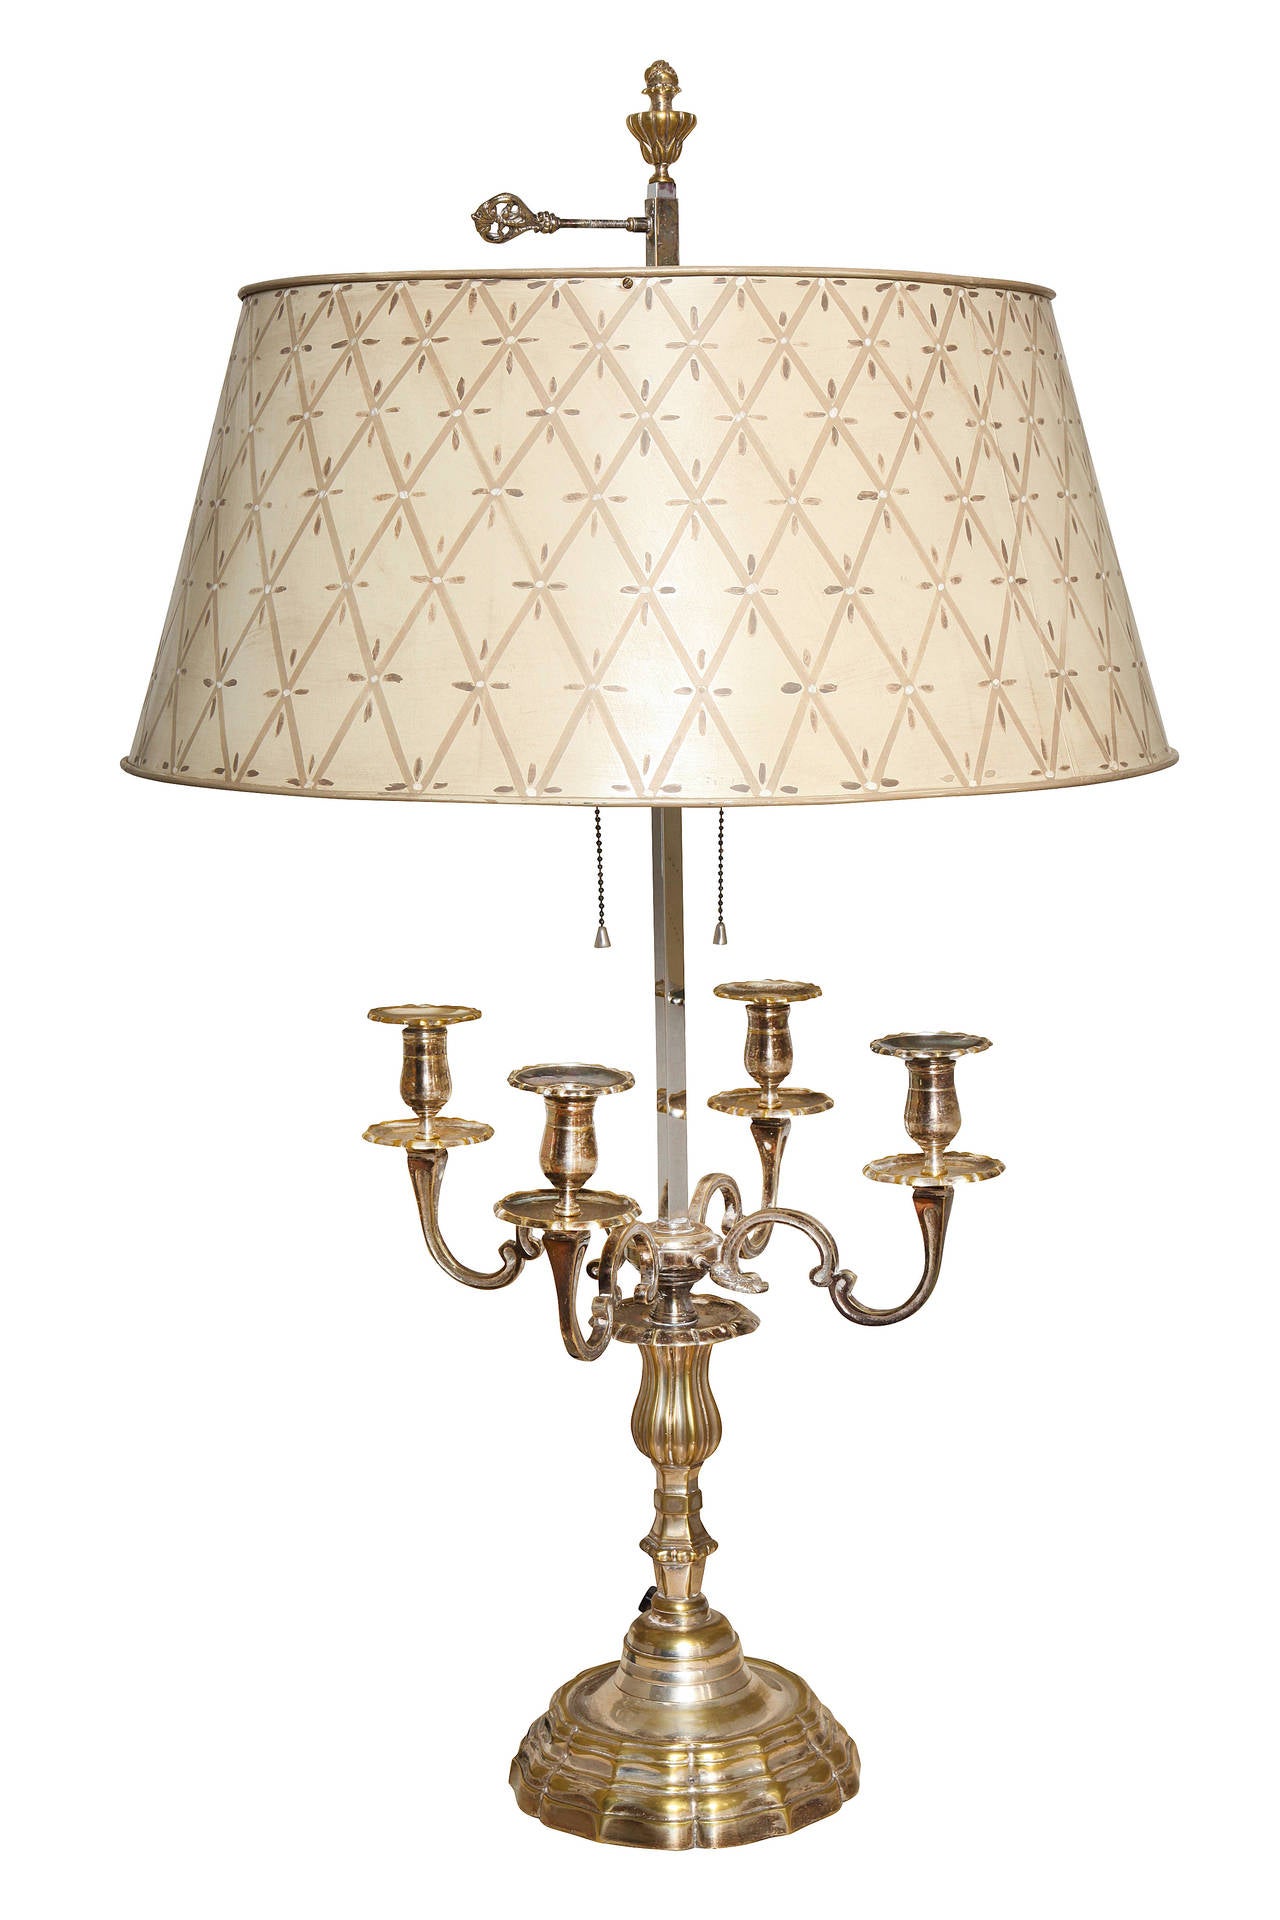 A pair of French Regence style silver-plated bronze four-light bouillotte lamps, the candles concealed by hand-painted tole shade of adjustable height.